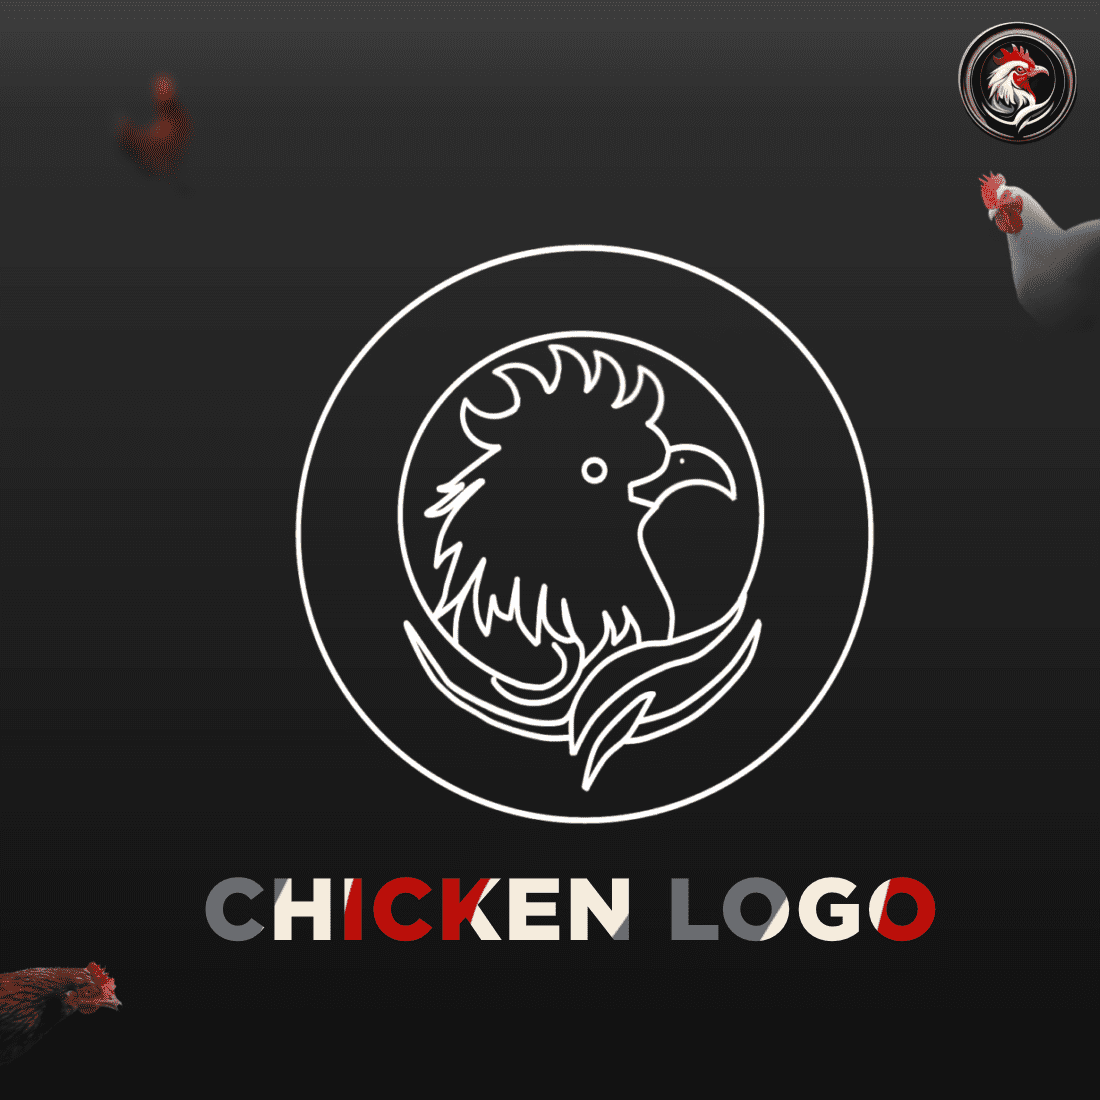 Chicken logo preview image.